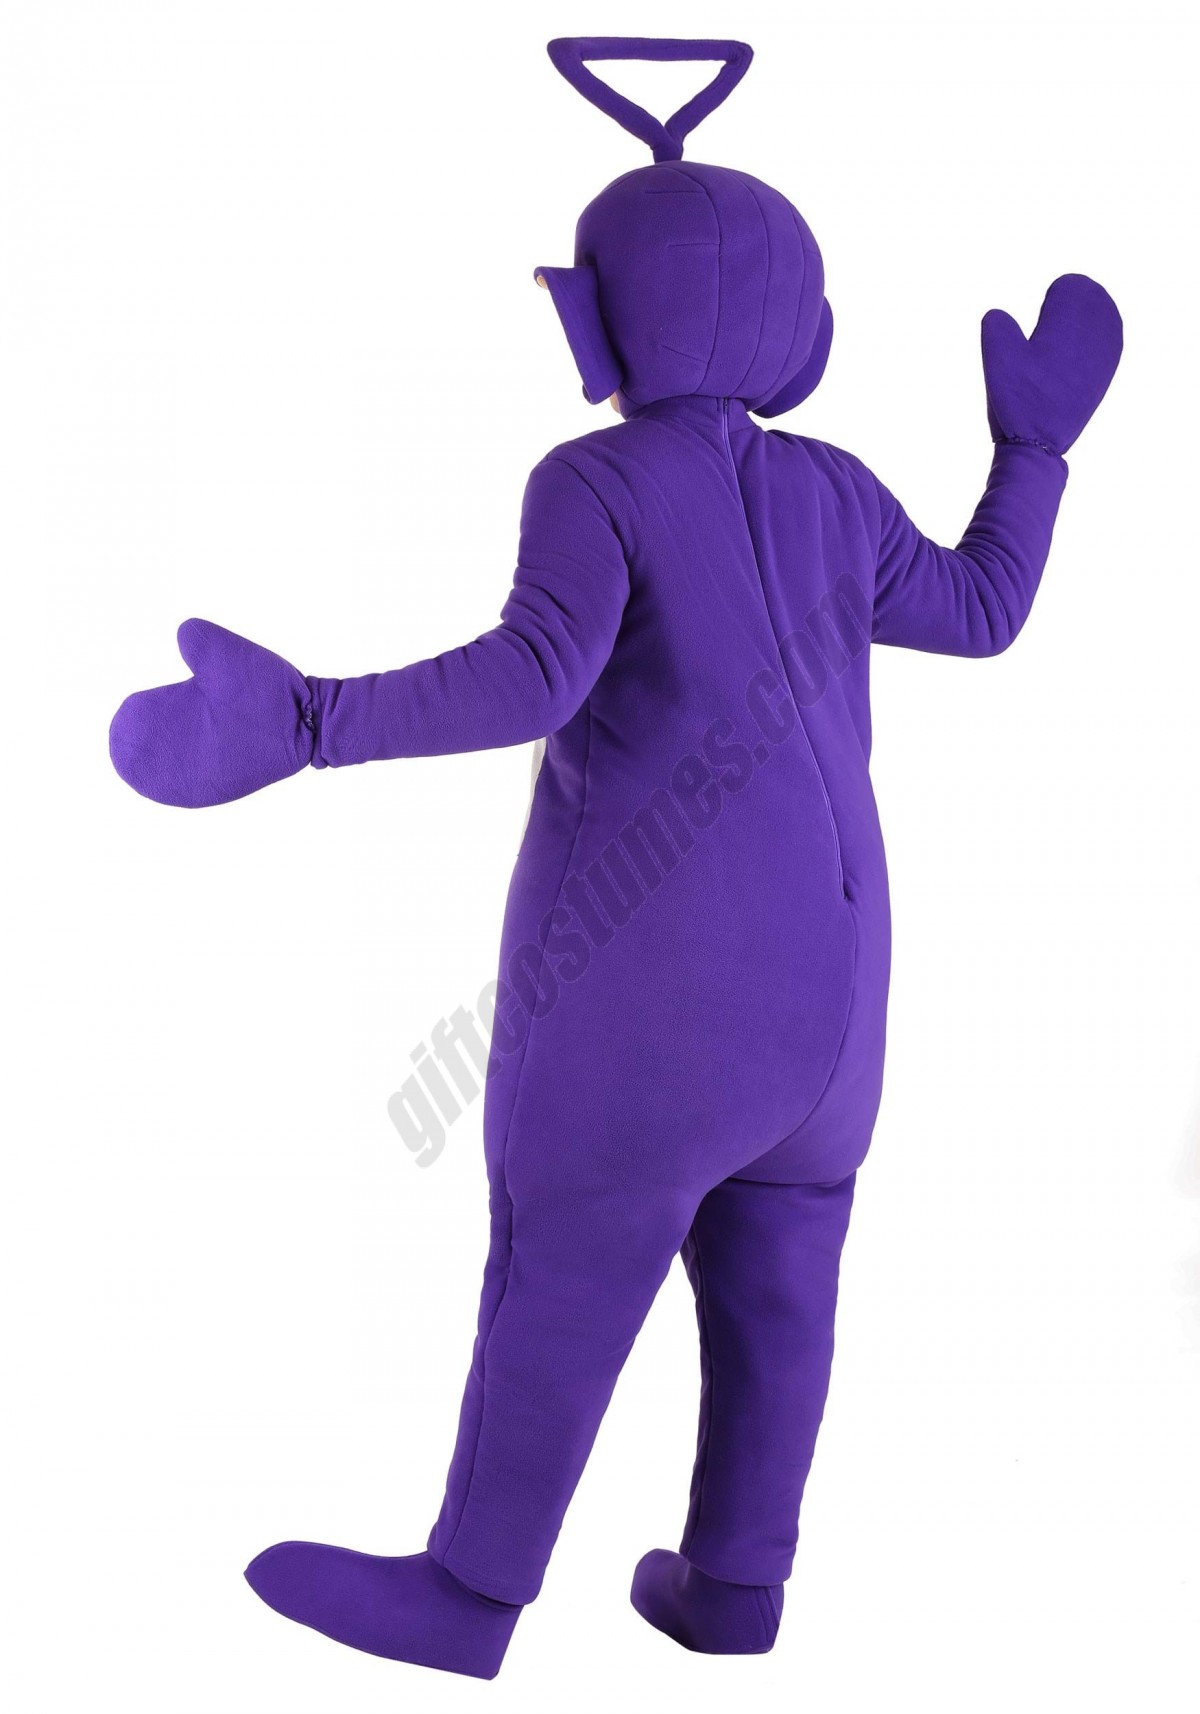 Plus Size Tinky Winky Teletubbies Costume for Adults Promotions - -1